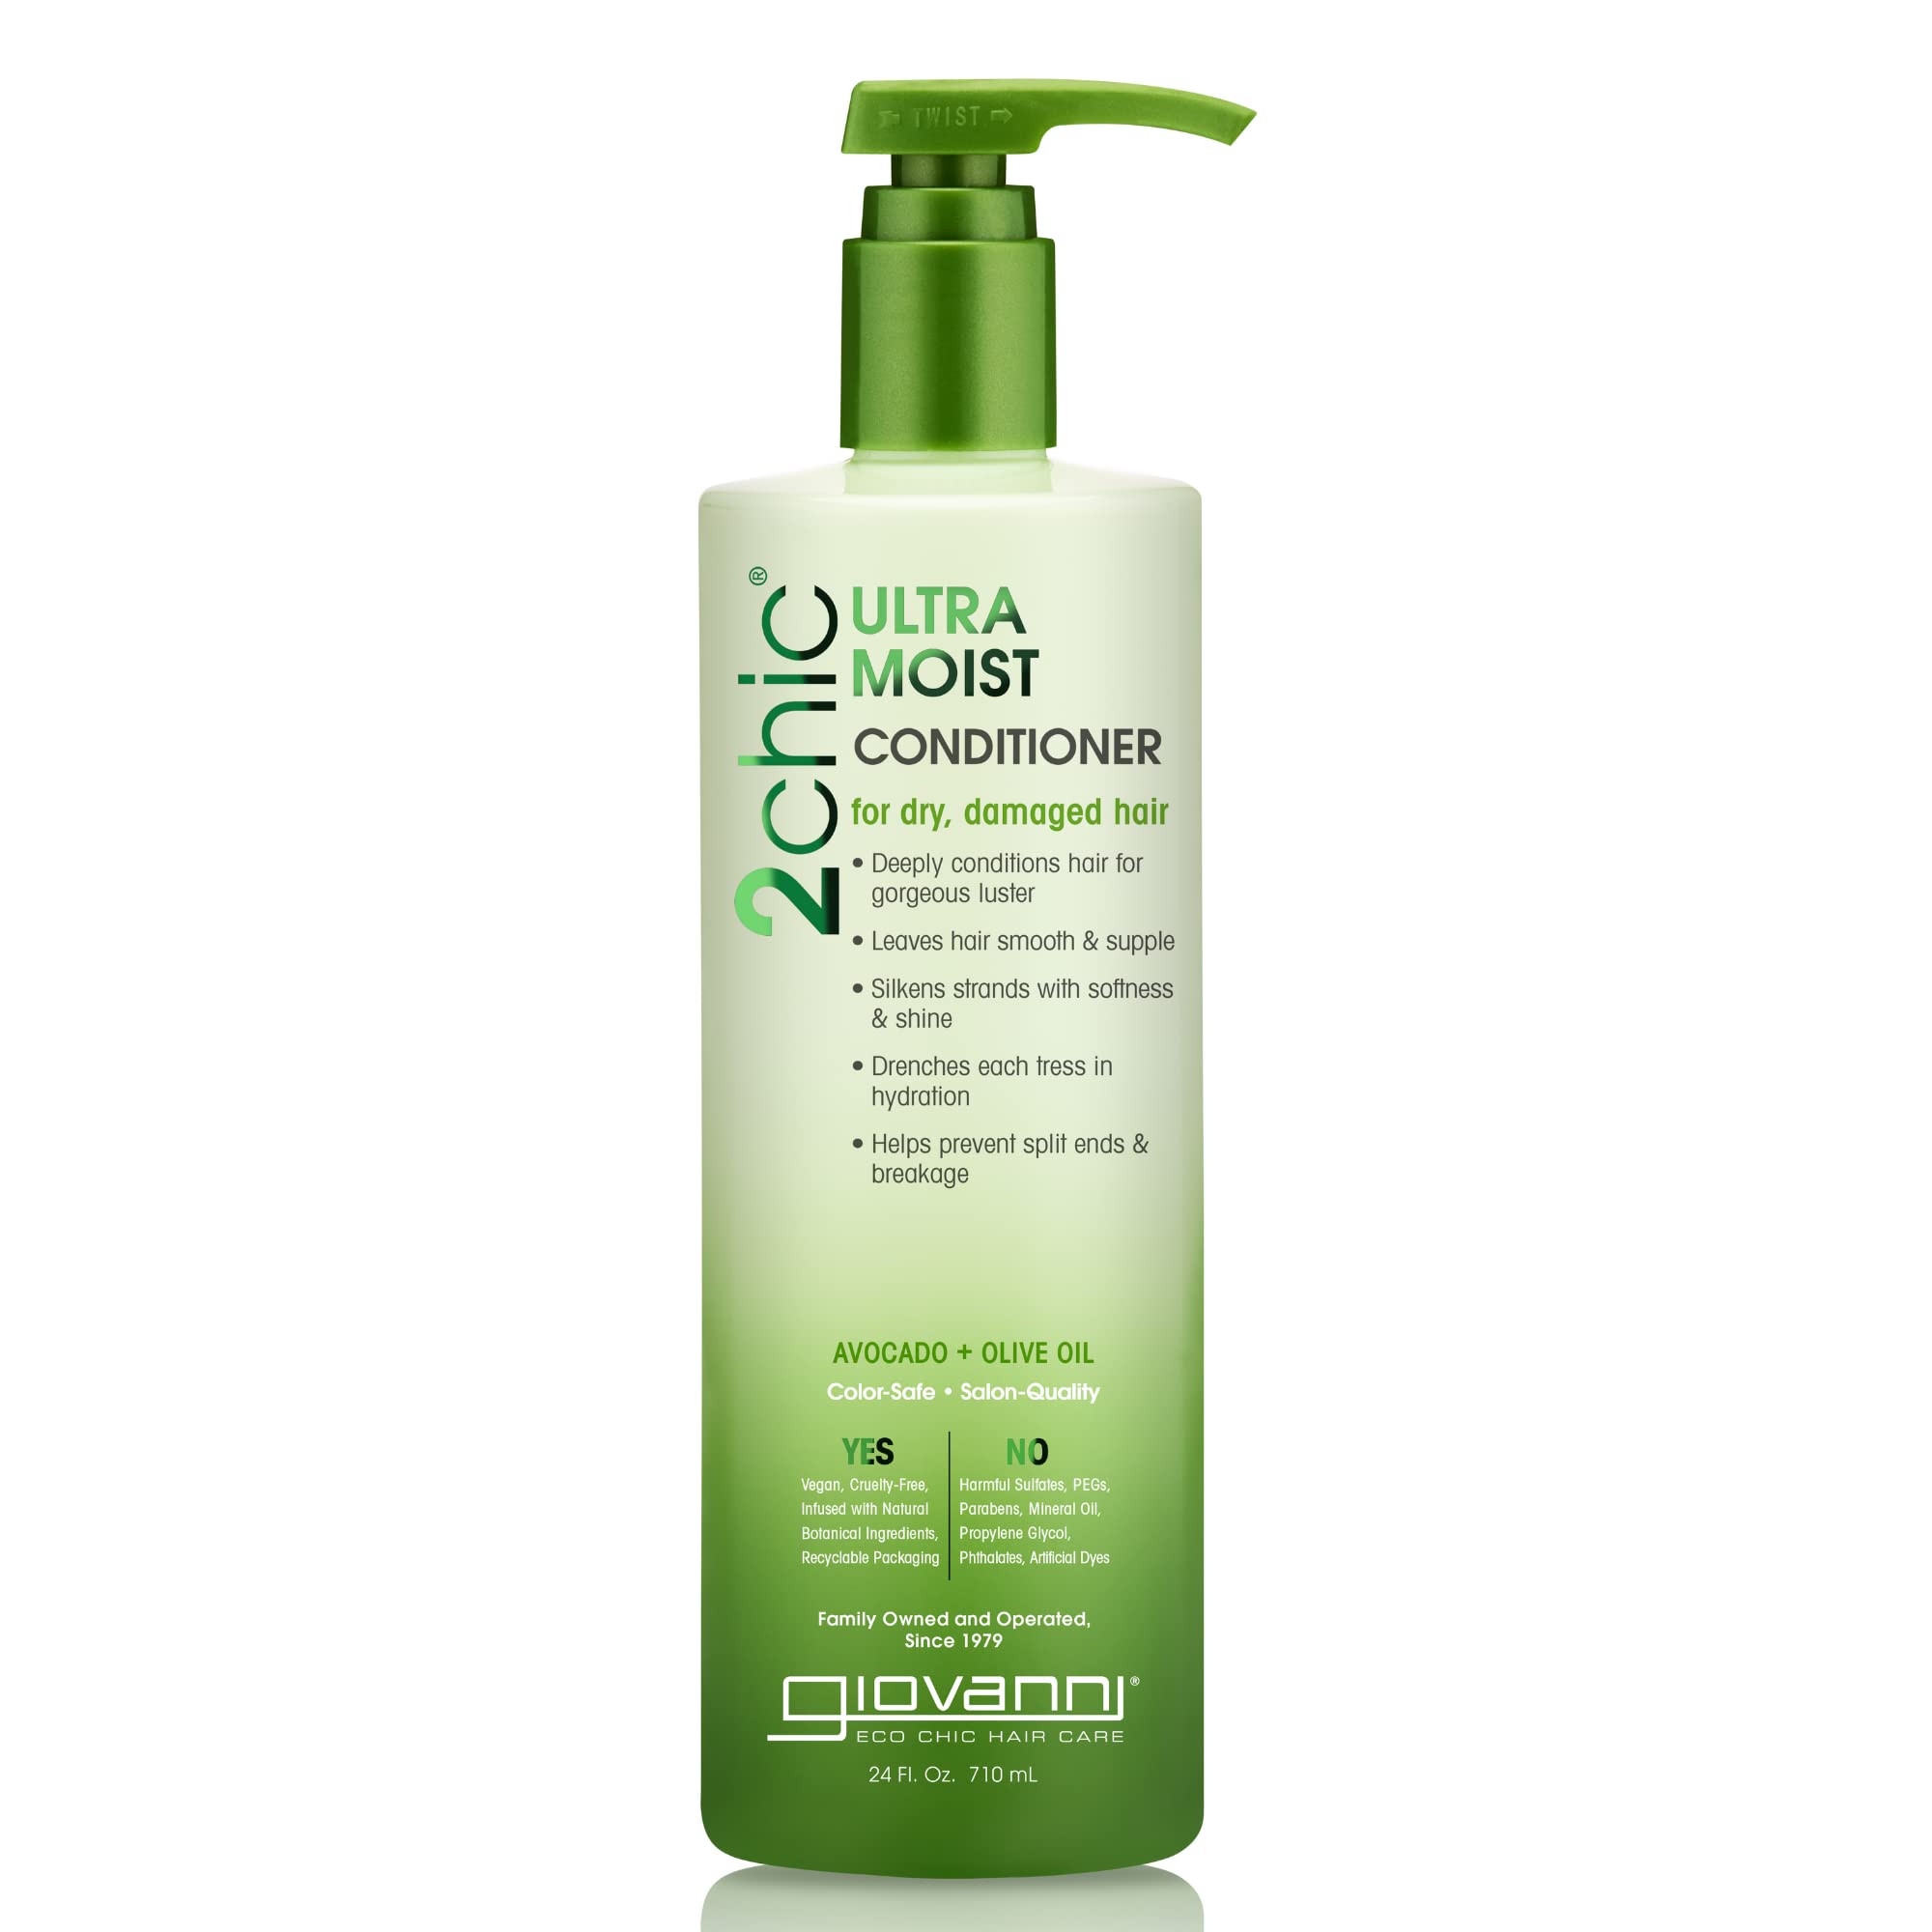 GIOVANNI 2chic Ultra-Moist Conditioner, Creamy Hydration Formula, Enriched with Aloe Vera, Shea Butter, Botanical Extracts, No Parabens, Color Safe, Ultra-Moist (Avocado + Olive Oil), 24 Fl Oz